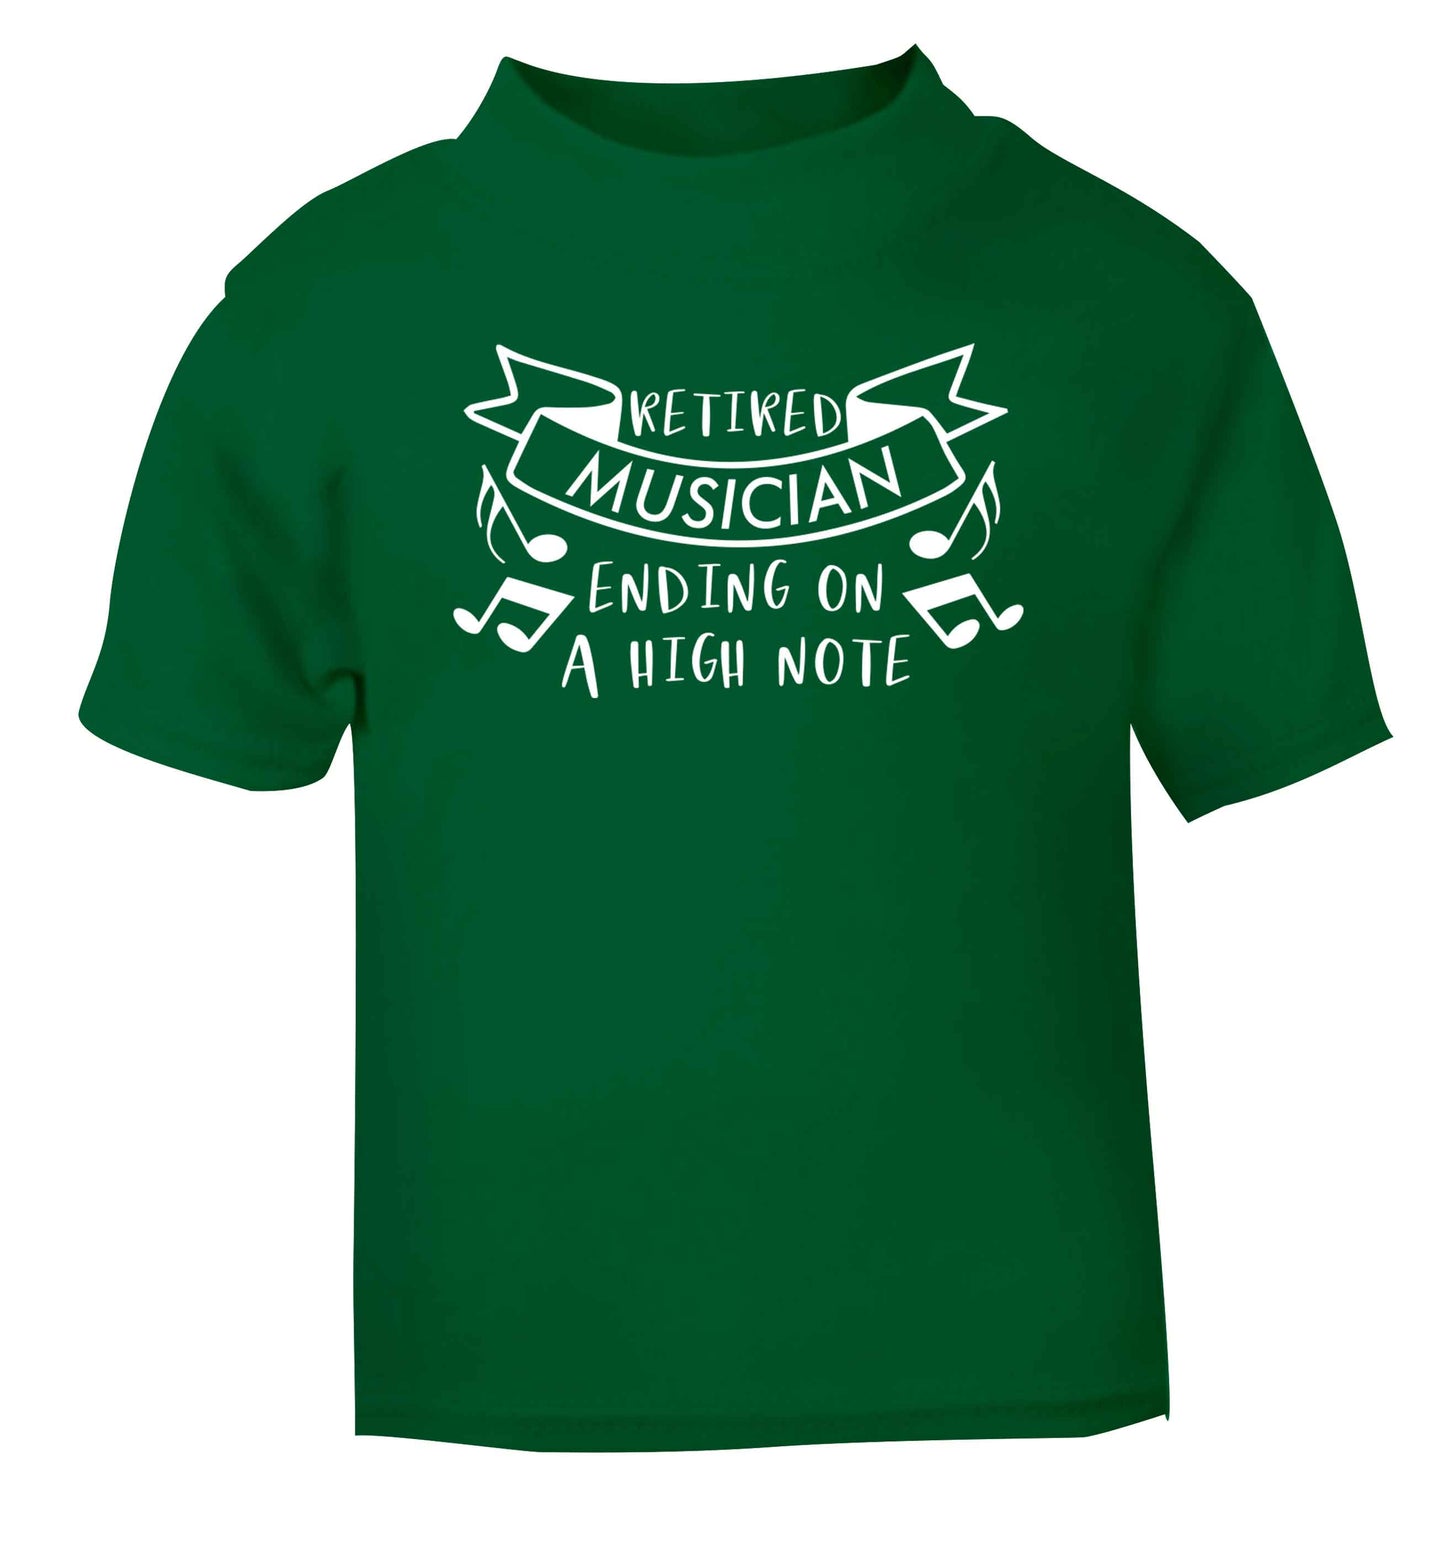 Retired musician ending on a high note green Baby Toddler Tshirt 2 Years